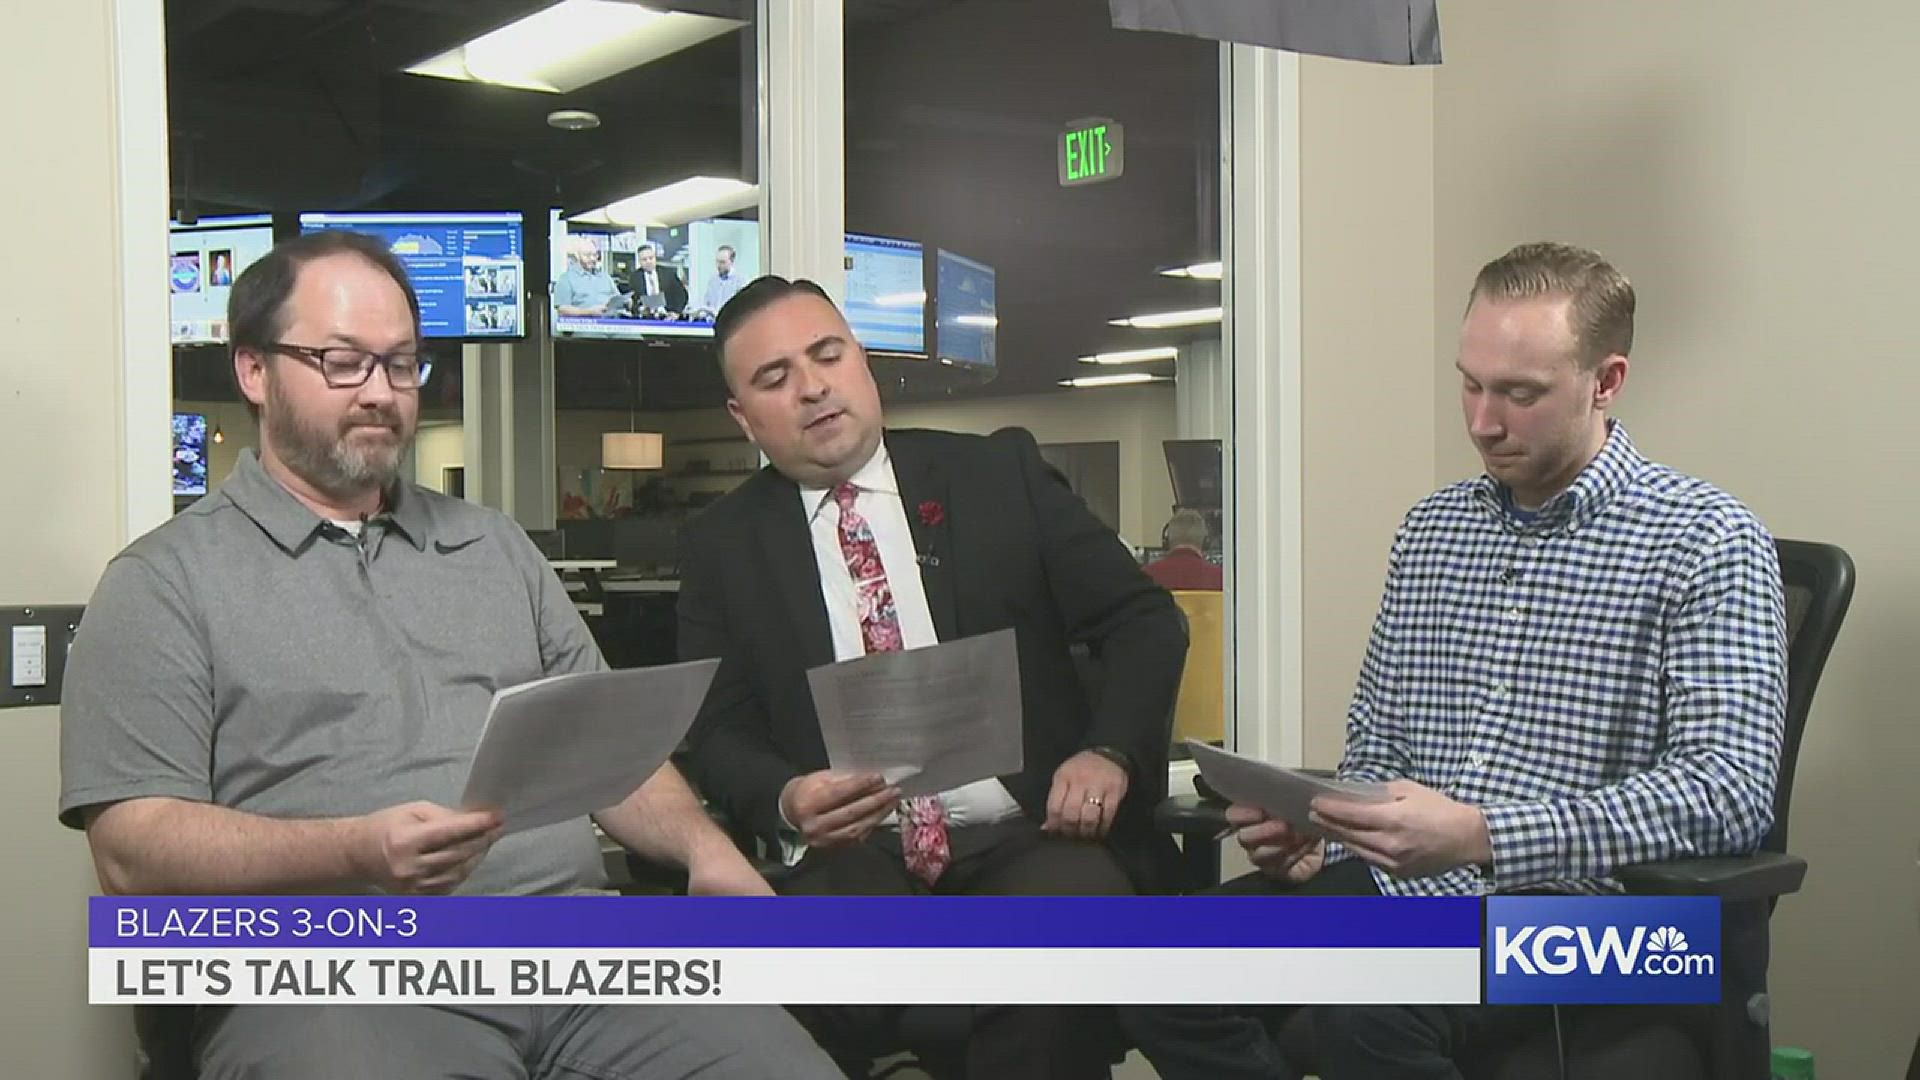 KGW's Jared Cowley, Orlando Sanchez and Nate Hanson talk about the Blazers' strong performance in January and whether the Blazers can sustain it.